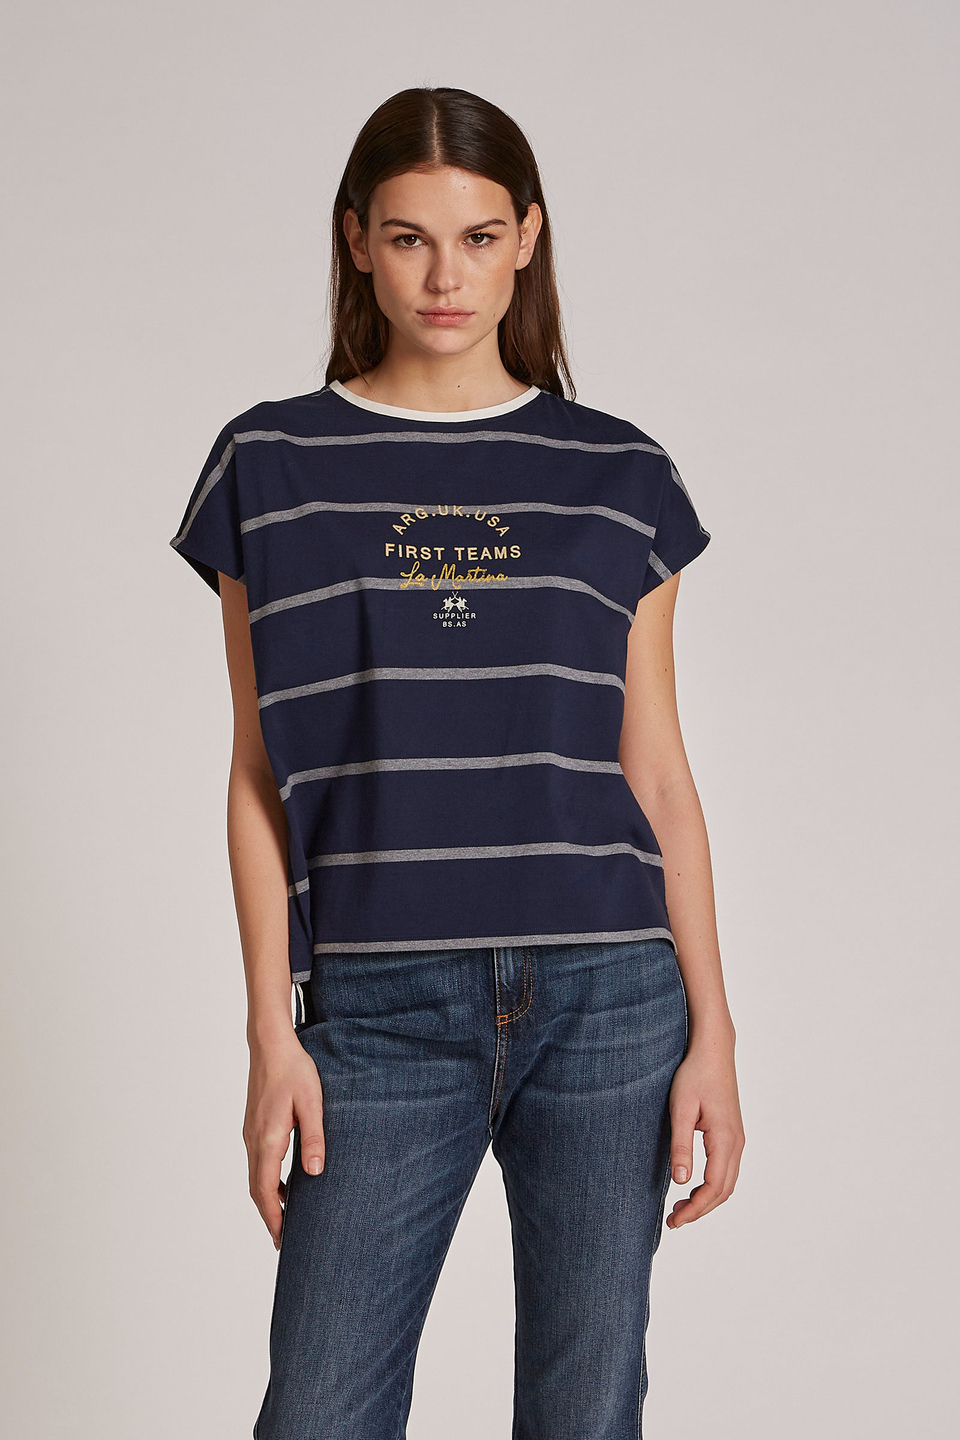 Women's regular-fit two-tone striped T-shirt in 100% cotton fabric - La Martina - Official Online Shop